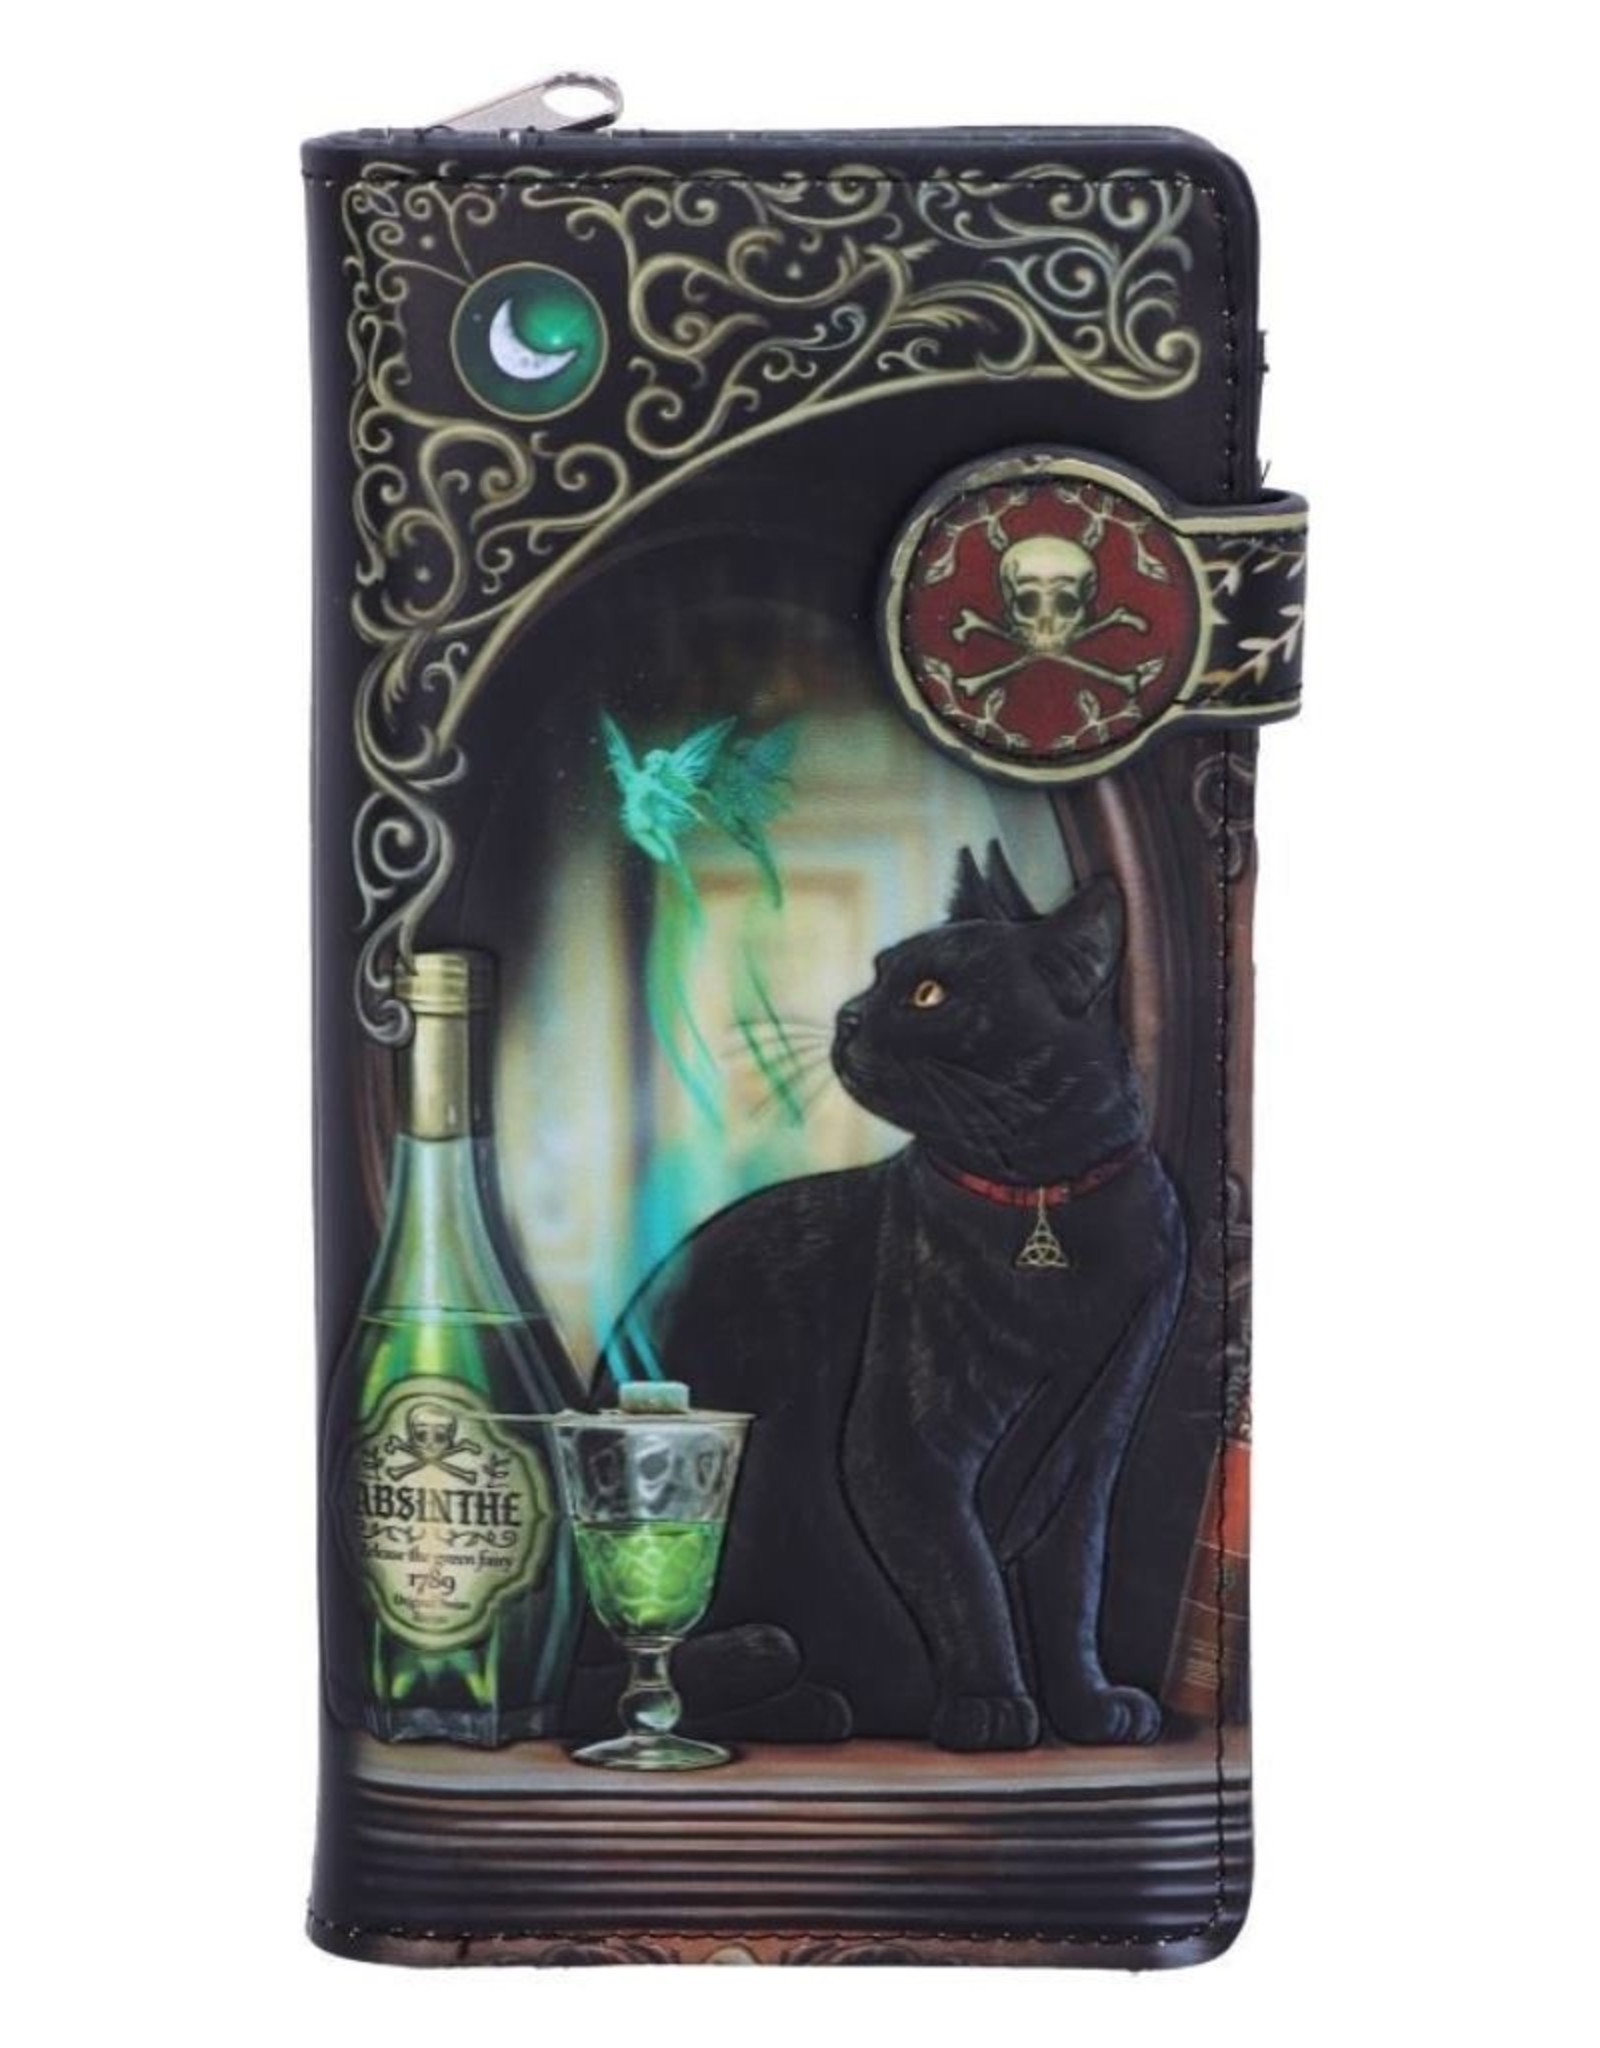 NemesisNow Fantasy wallets and purses - Absinthe Embossed Purse Lisa Parker